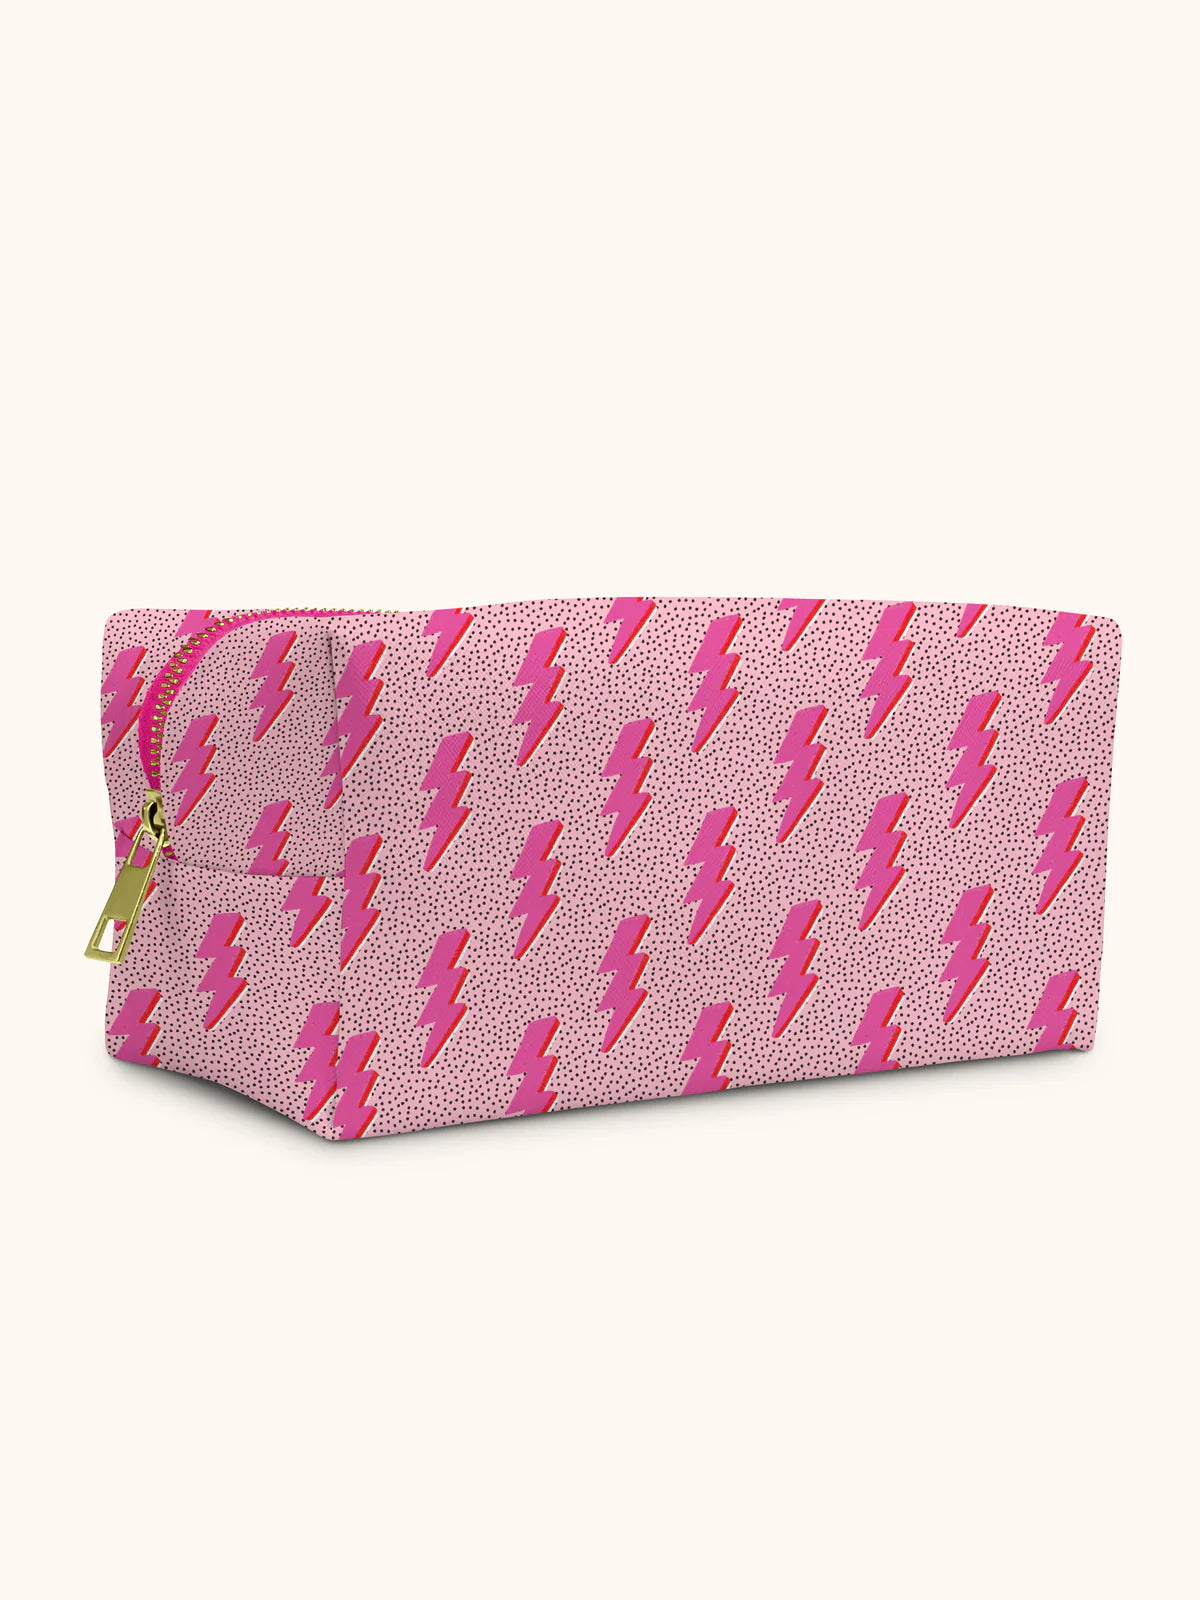 CHARGED UP LOAF COSMETIC POUCH